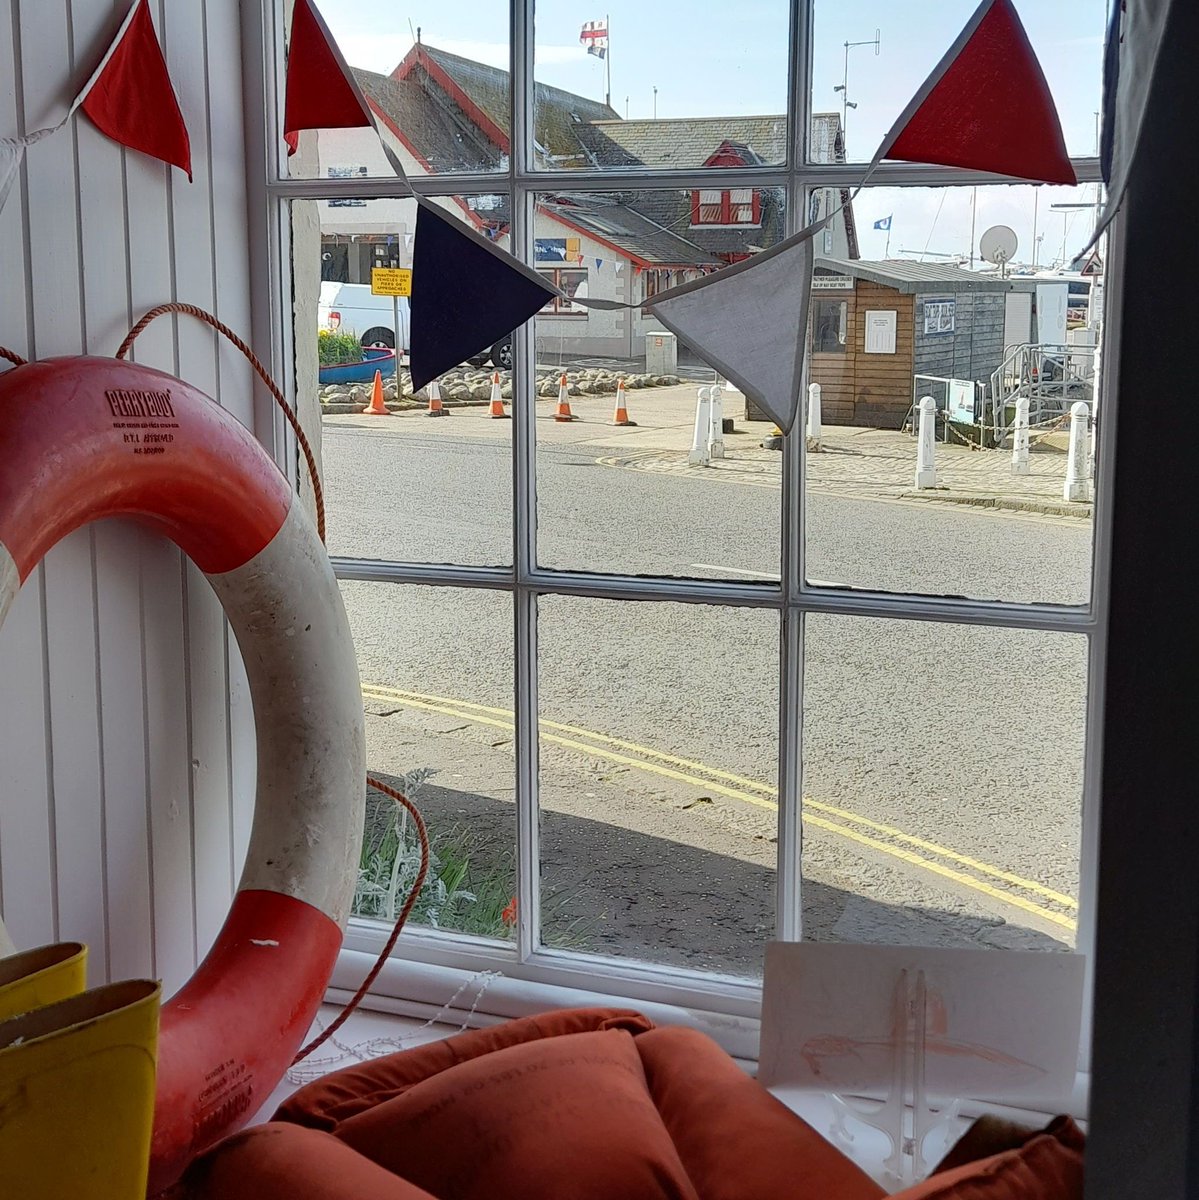 Excitement building down at @AnstrutherRNLI this morning - 4 hours to go! Wishing everyone in the town a happy day enjoying the seafood, confectionery, ice cream and cocktail specials laid on by the fish and chip shops, bakers, cafes and pubs and most of all the community spirit!